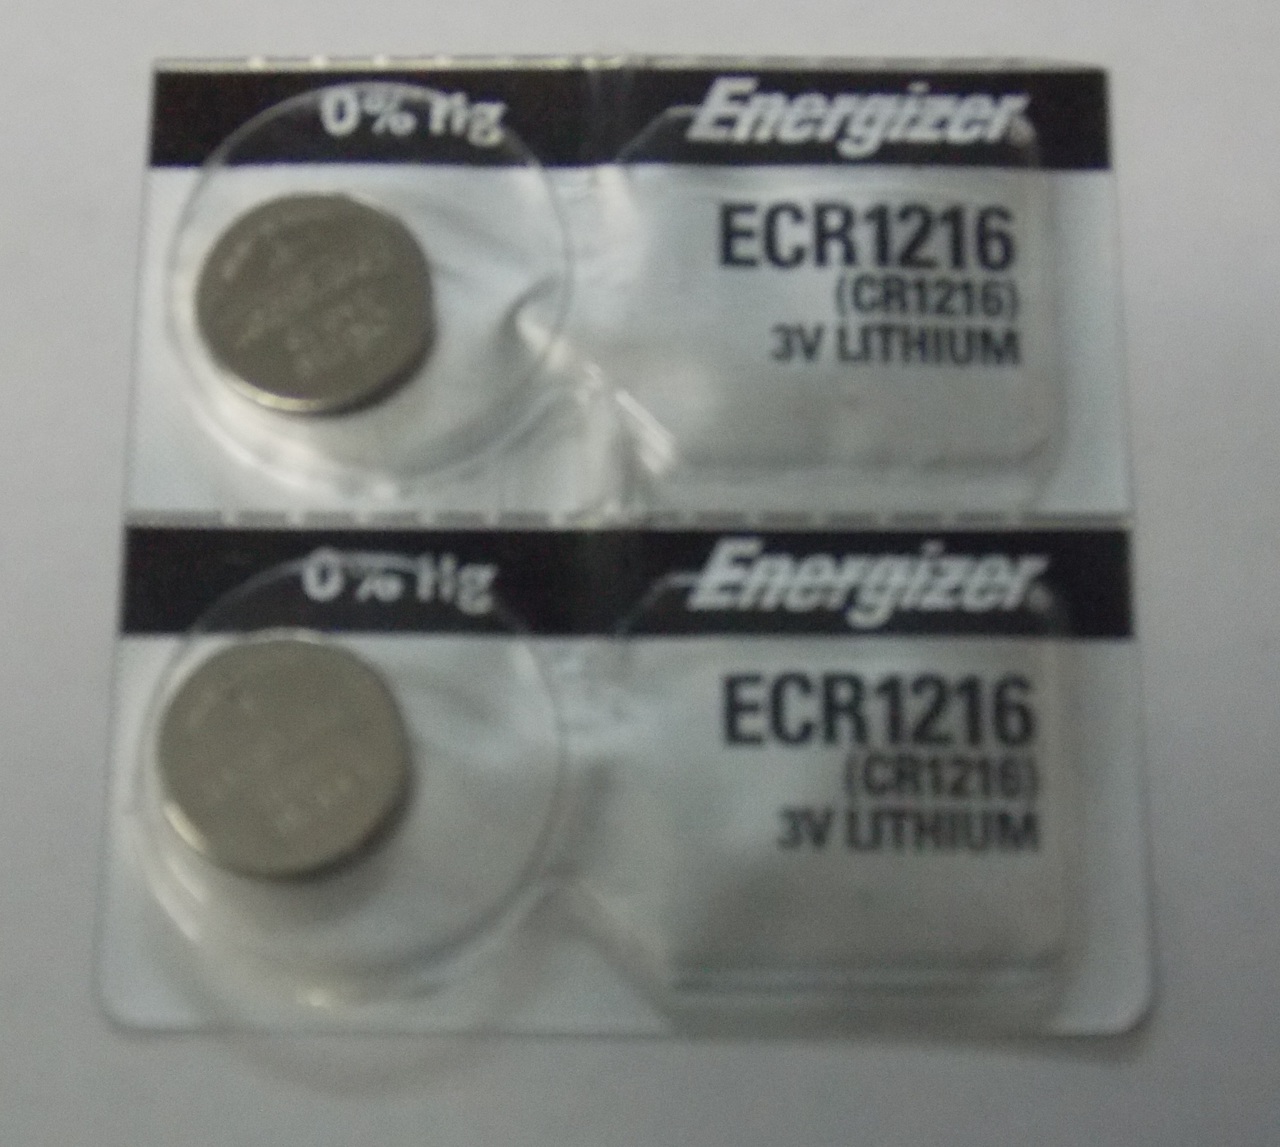 Energizer CR1216 3V Lithium Coin Battery - 2 Pack + FREE SHIPPING